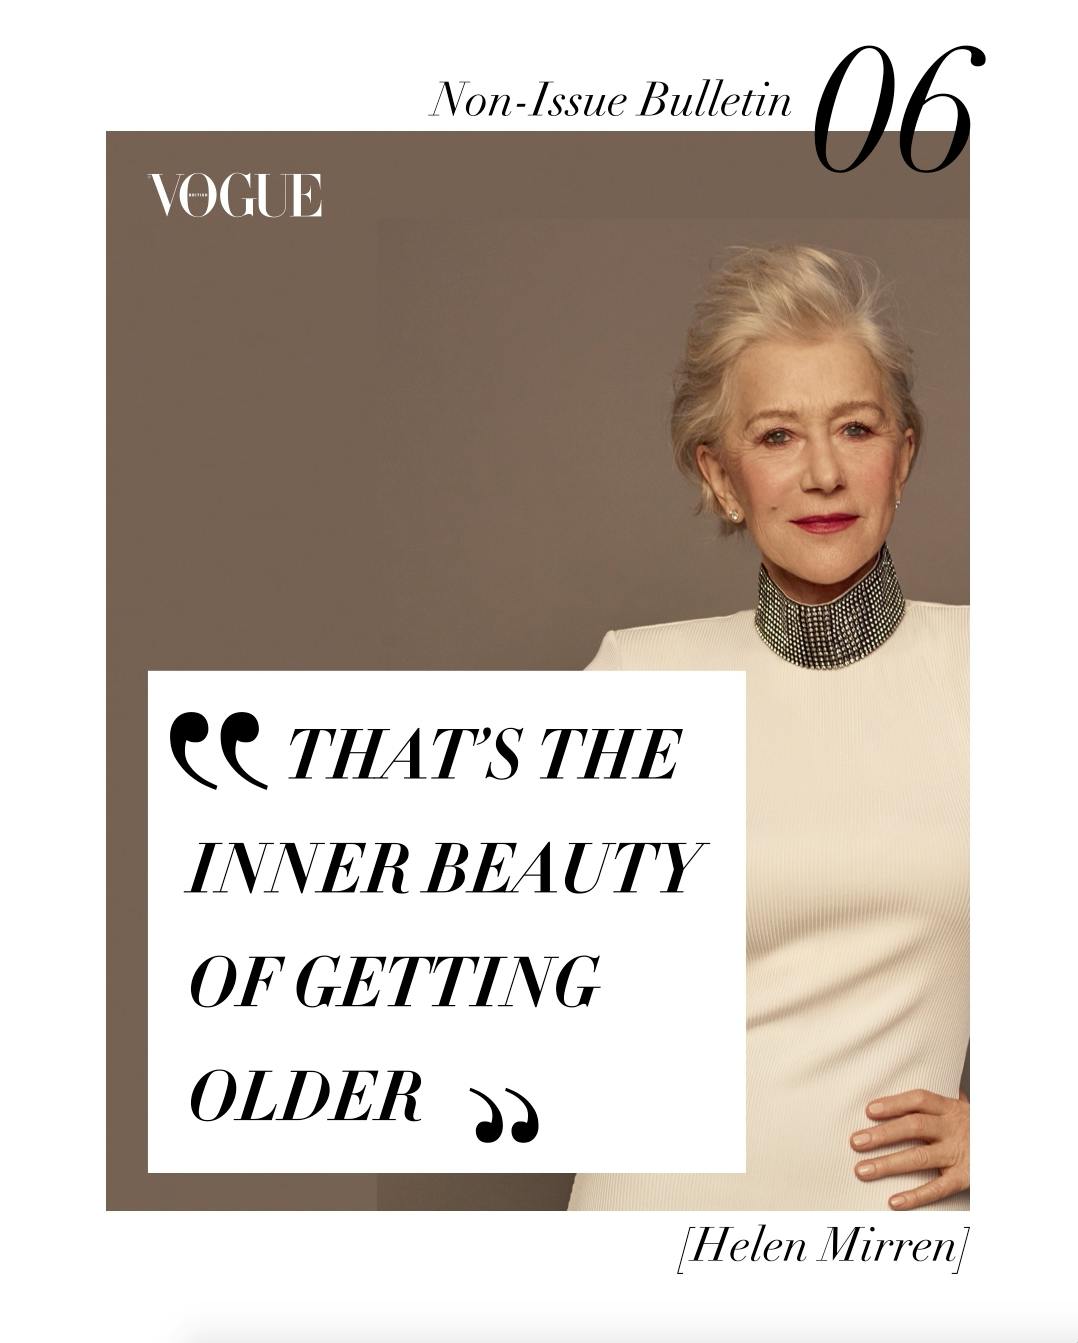 McCann, L'Oreal Paris and British Vogue Smash Preconceptions About Aging  with 'The Non-Issue